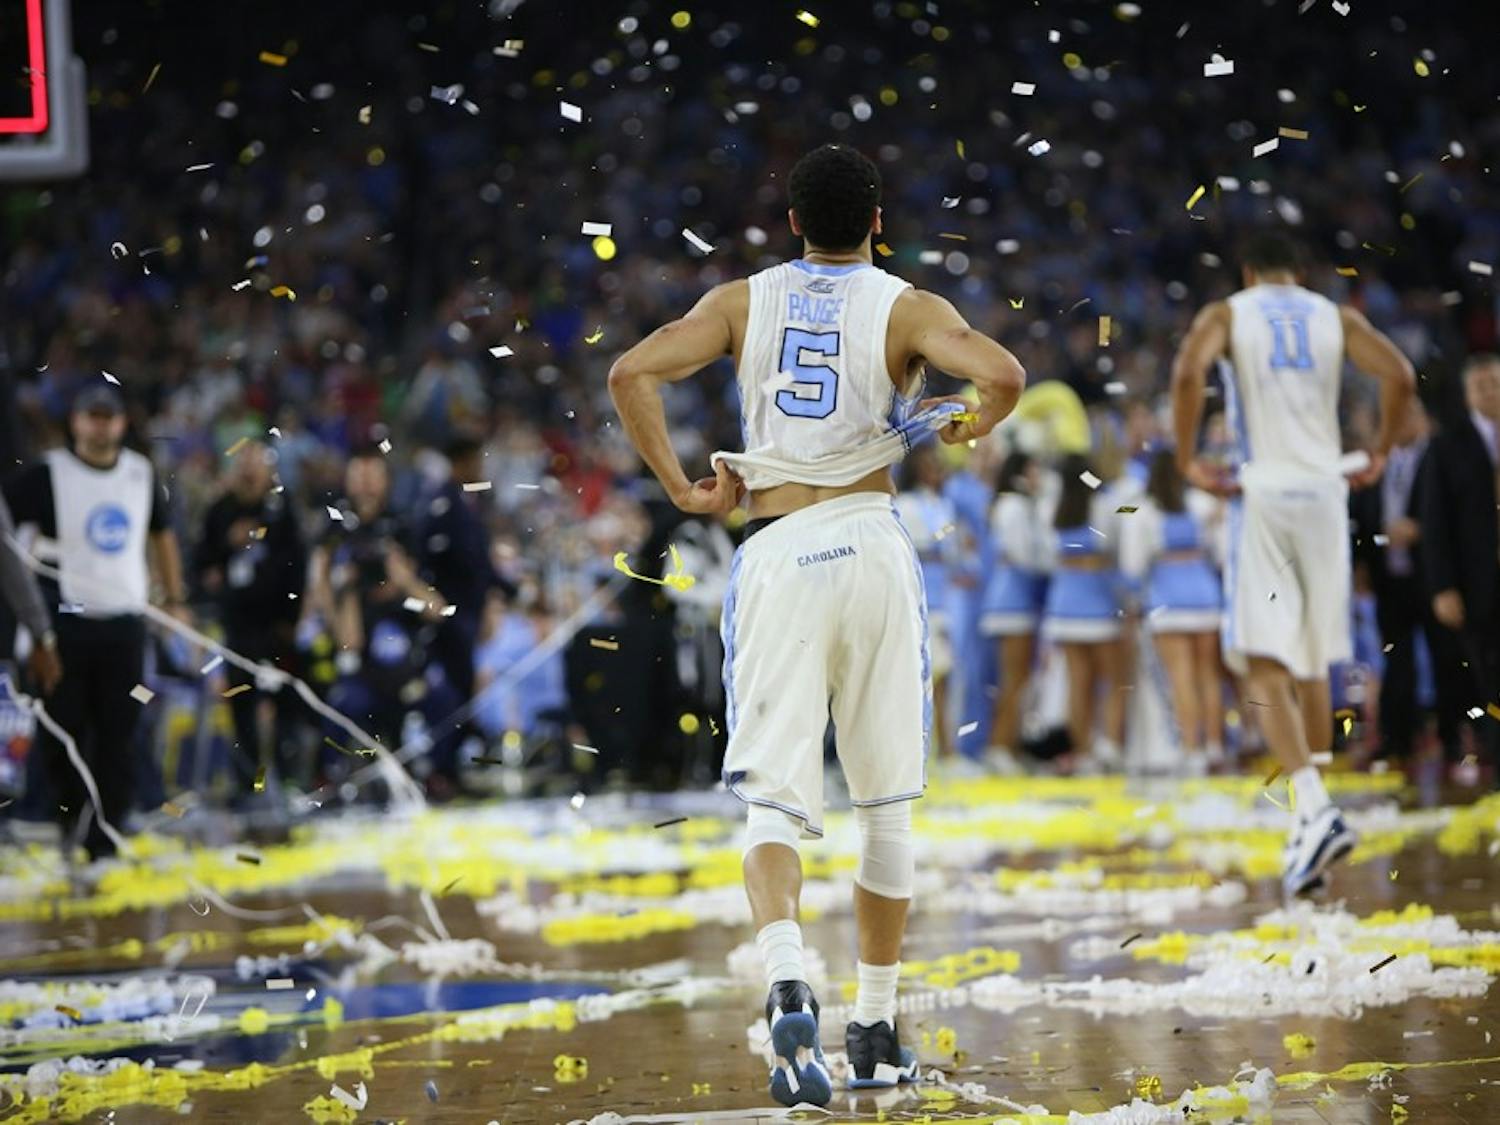 Then-senior guard Marcus Paige (5) walks off the court after UNC's buzzer-beating loss to Villanova in the 2016 national championship in Houston, Tex.